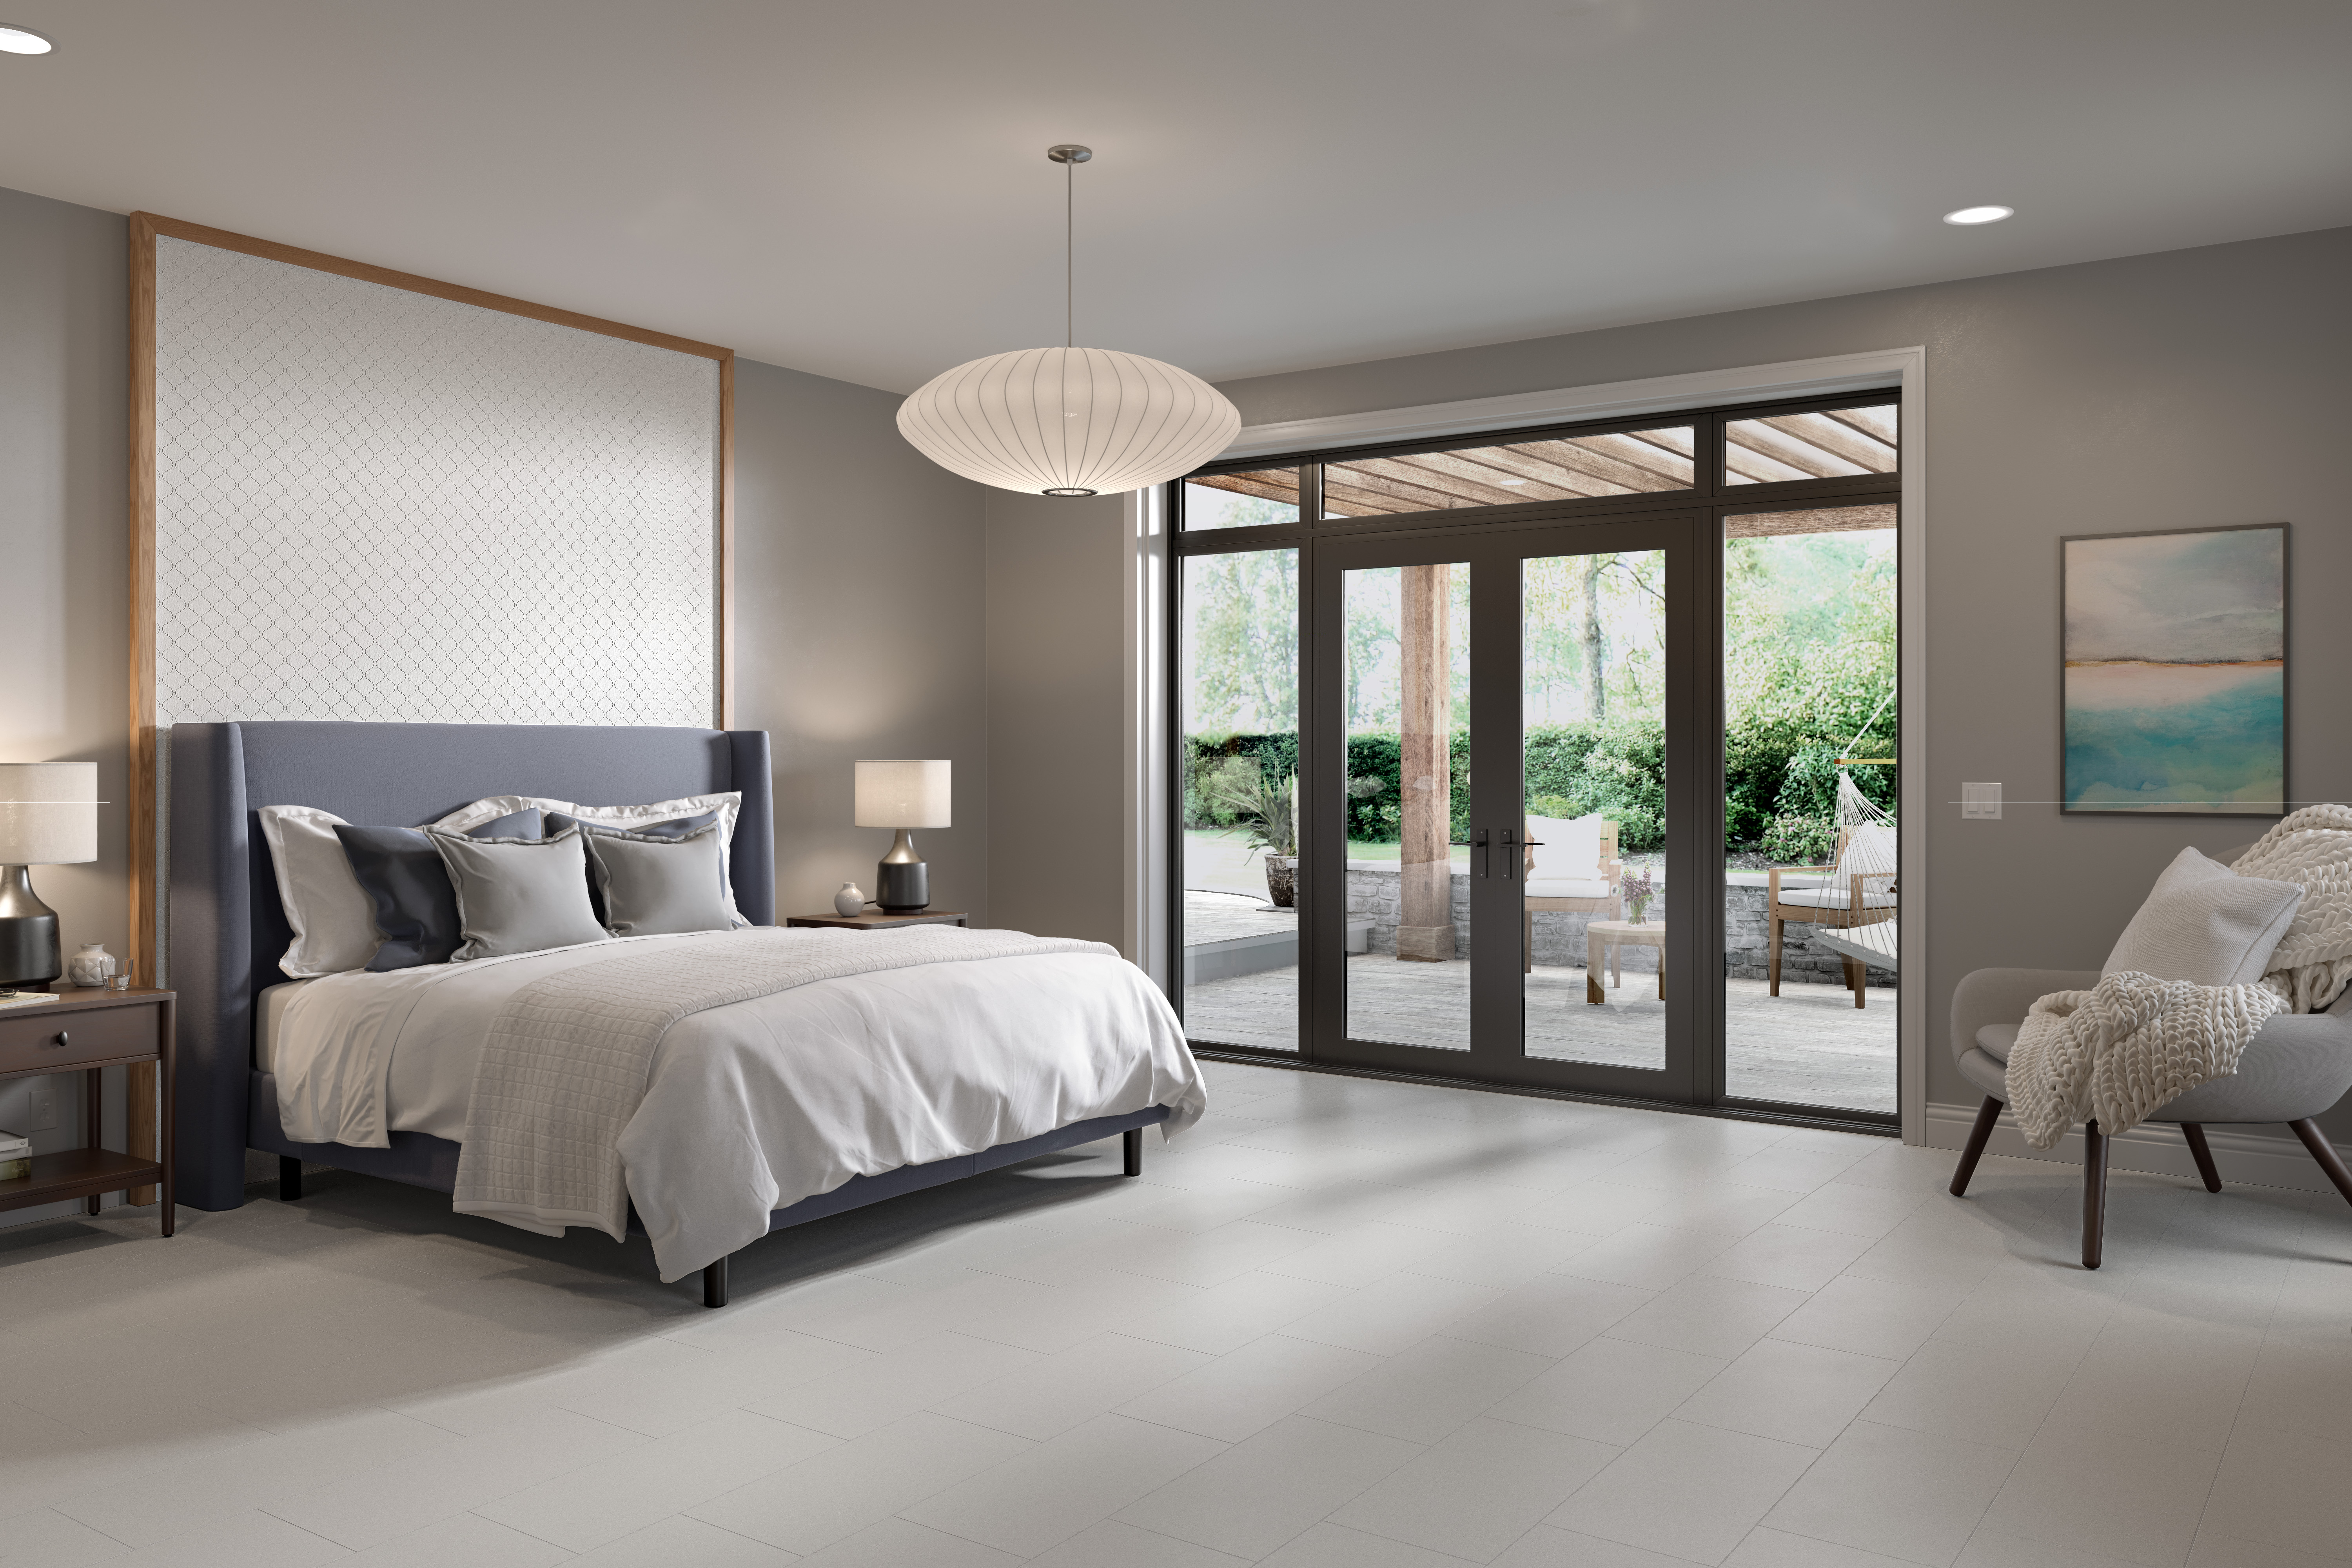 Open layout bedroom scene with white porcelain tile, queen bed, and sliding door view to patio